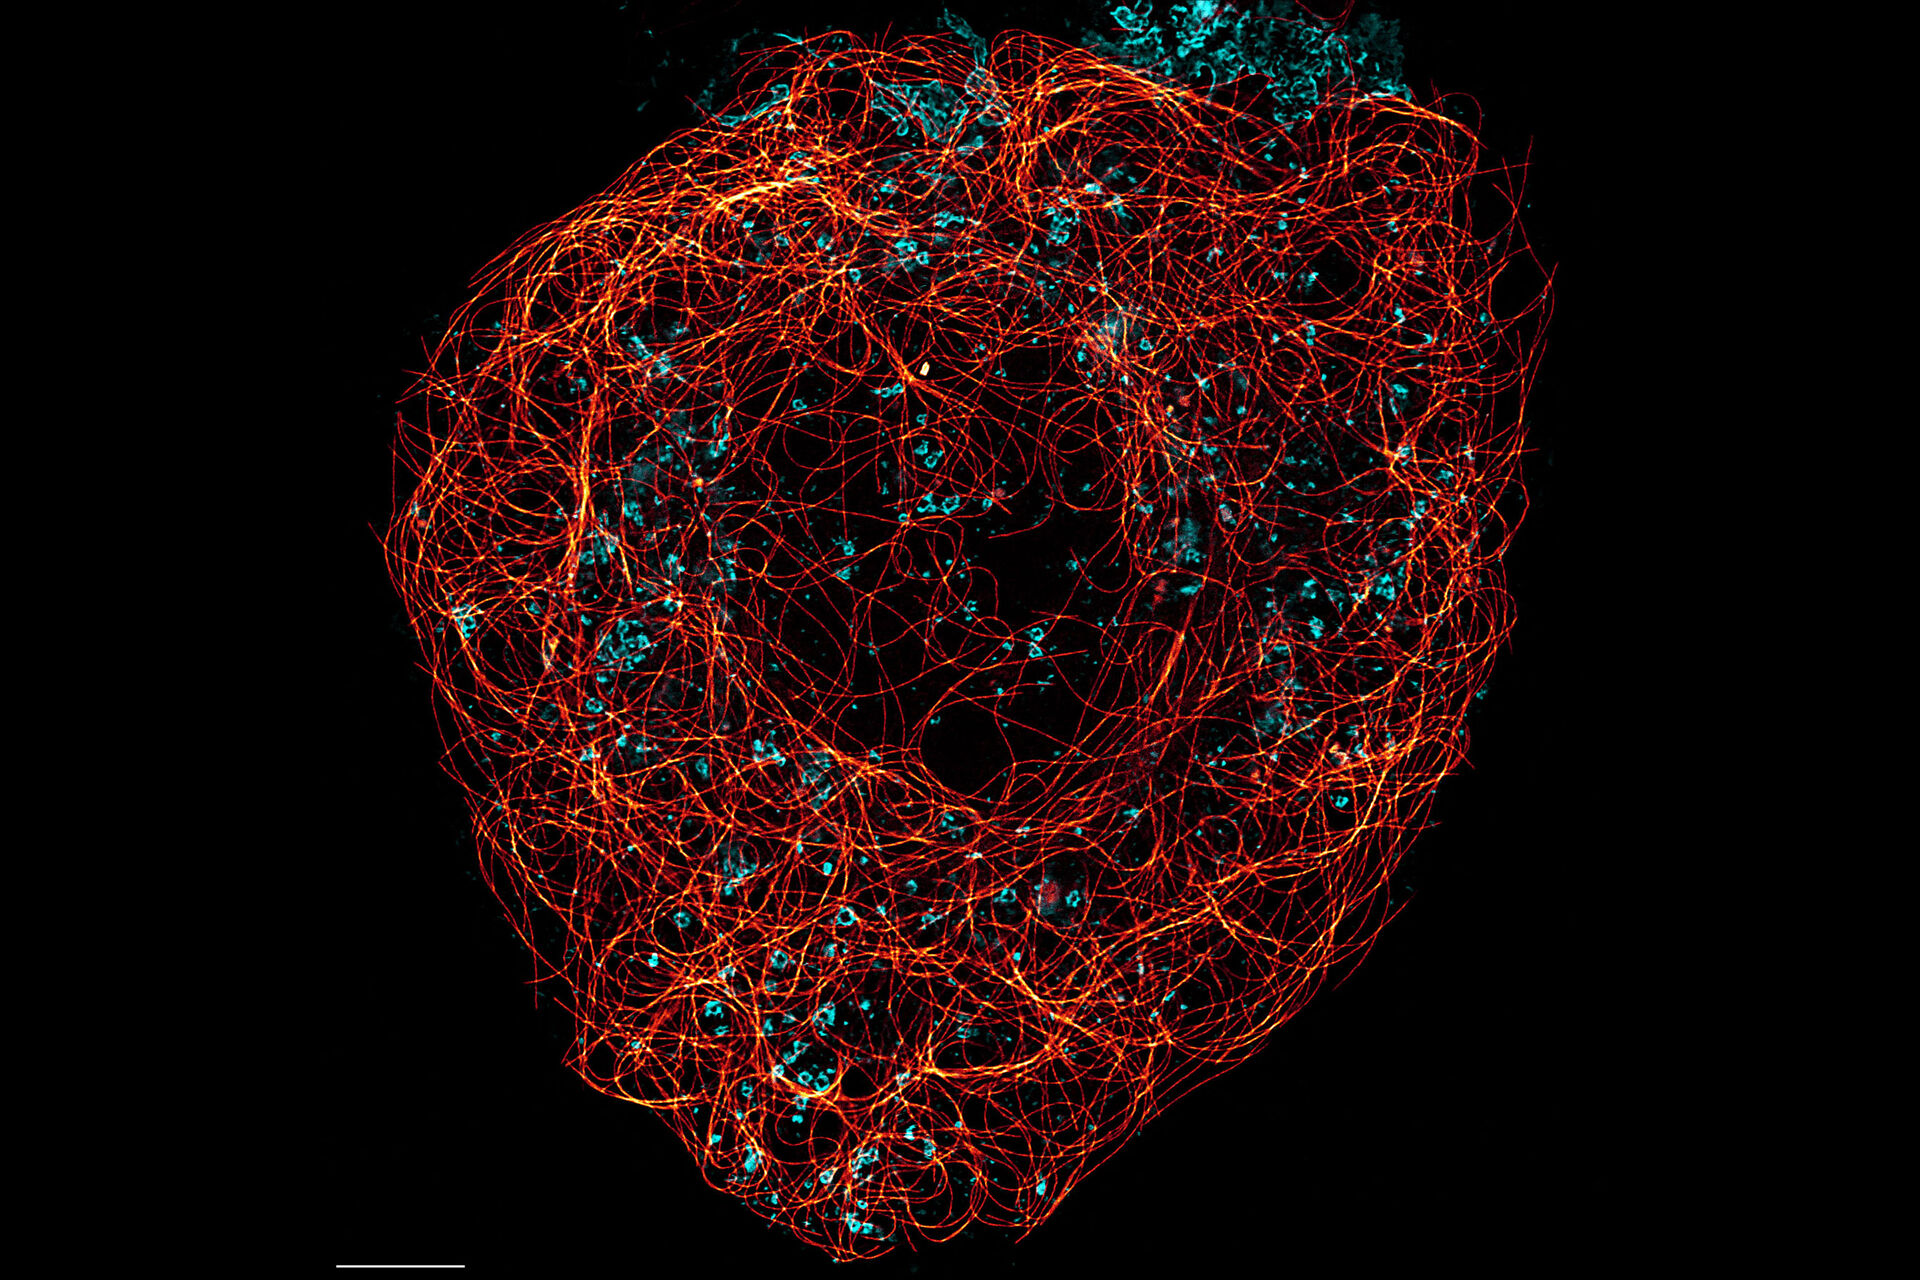 [Translate to chinese:] Cytoskeleton and membranes in live cell imaged with TauSTED - STED